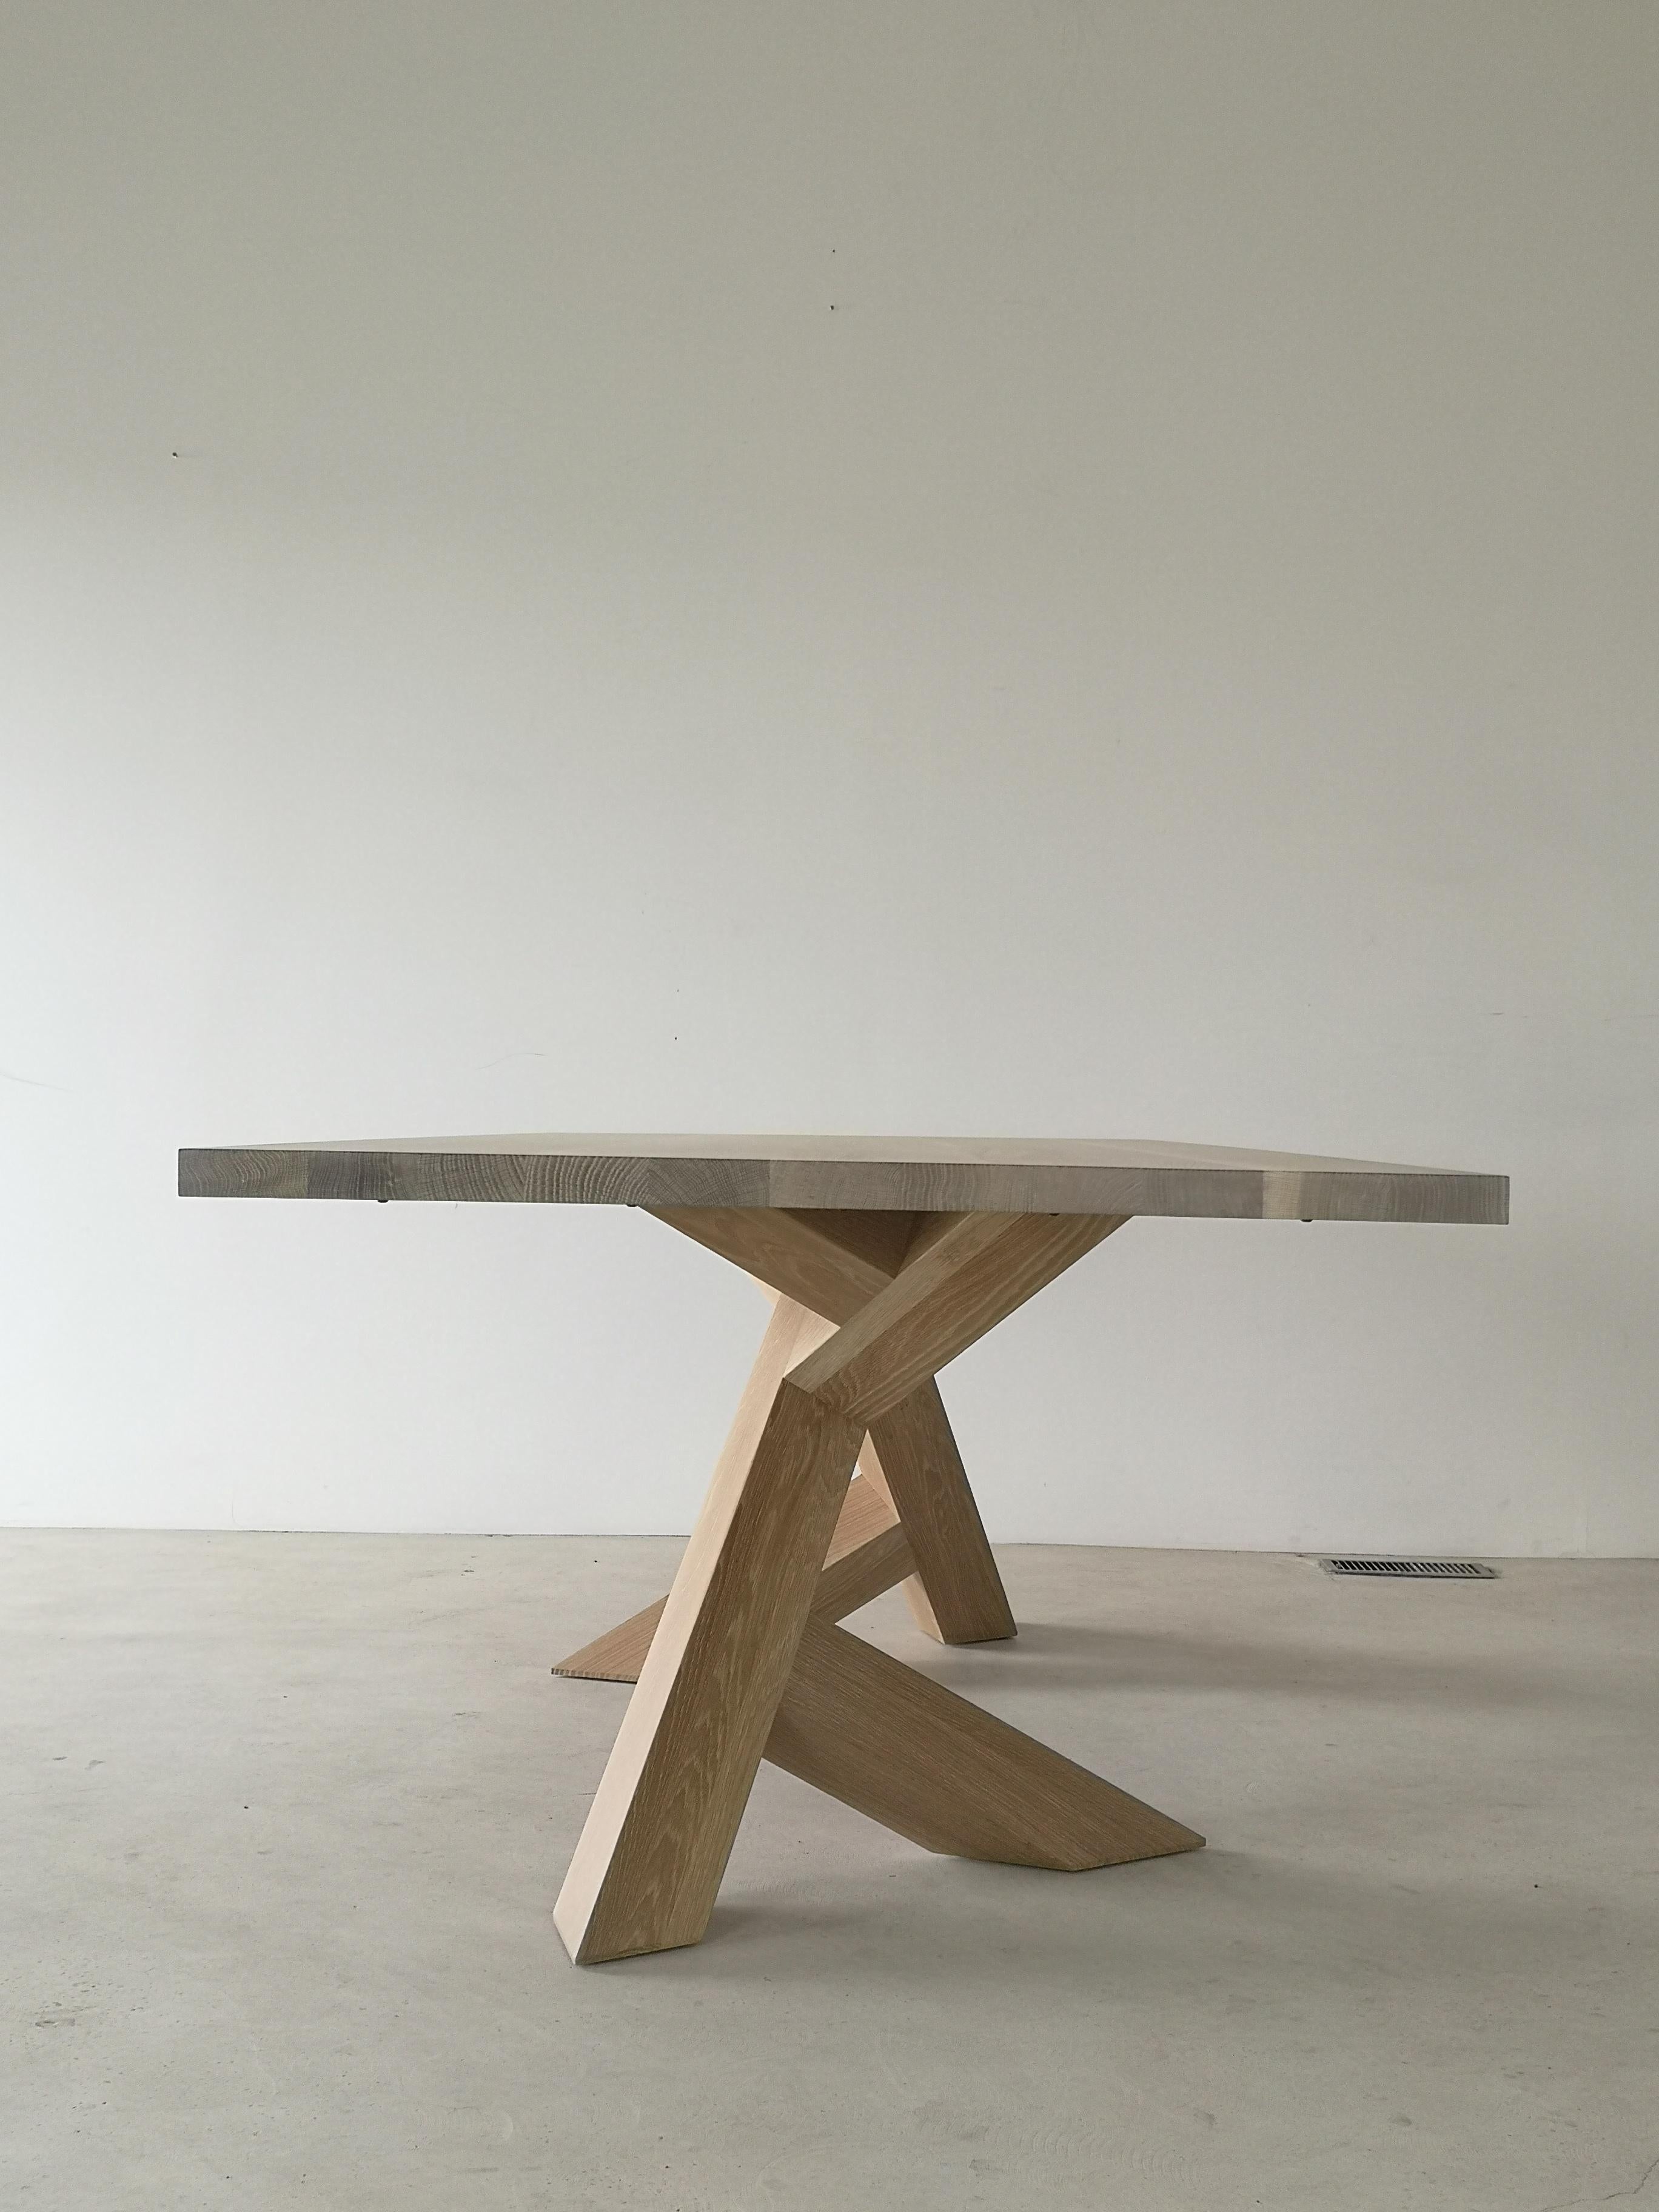 North American Iconoclast Modern Solid Hardwood Dining Table by Izm